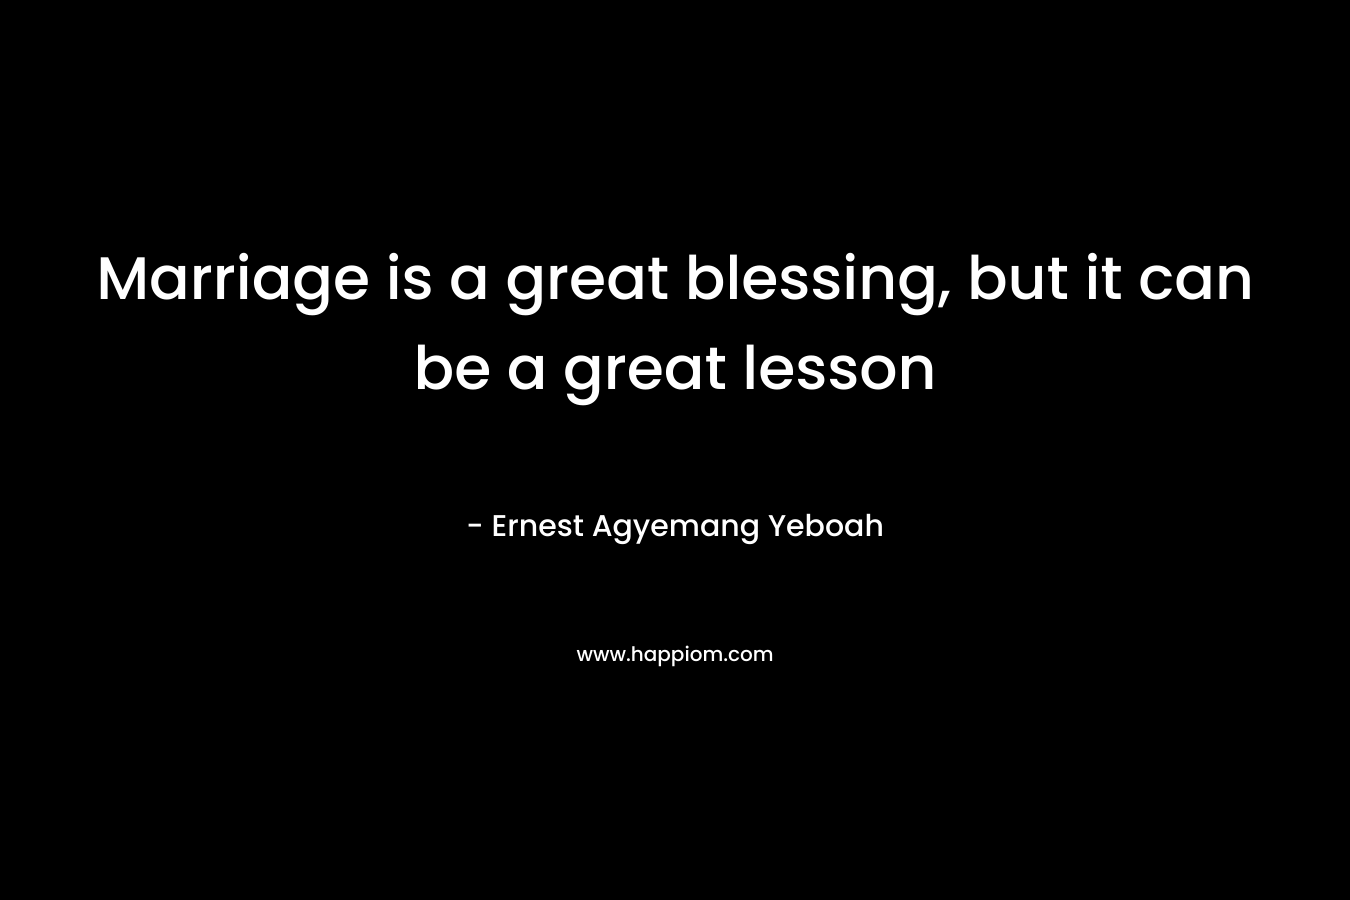 Marriage is a great blessing, but it can be a great lesson